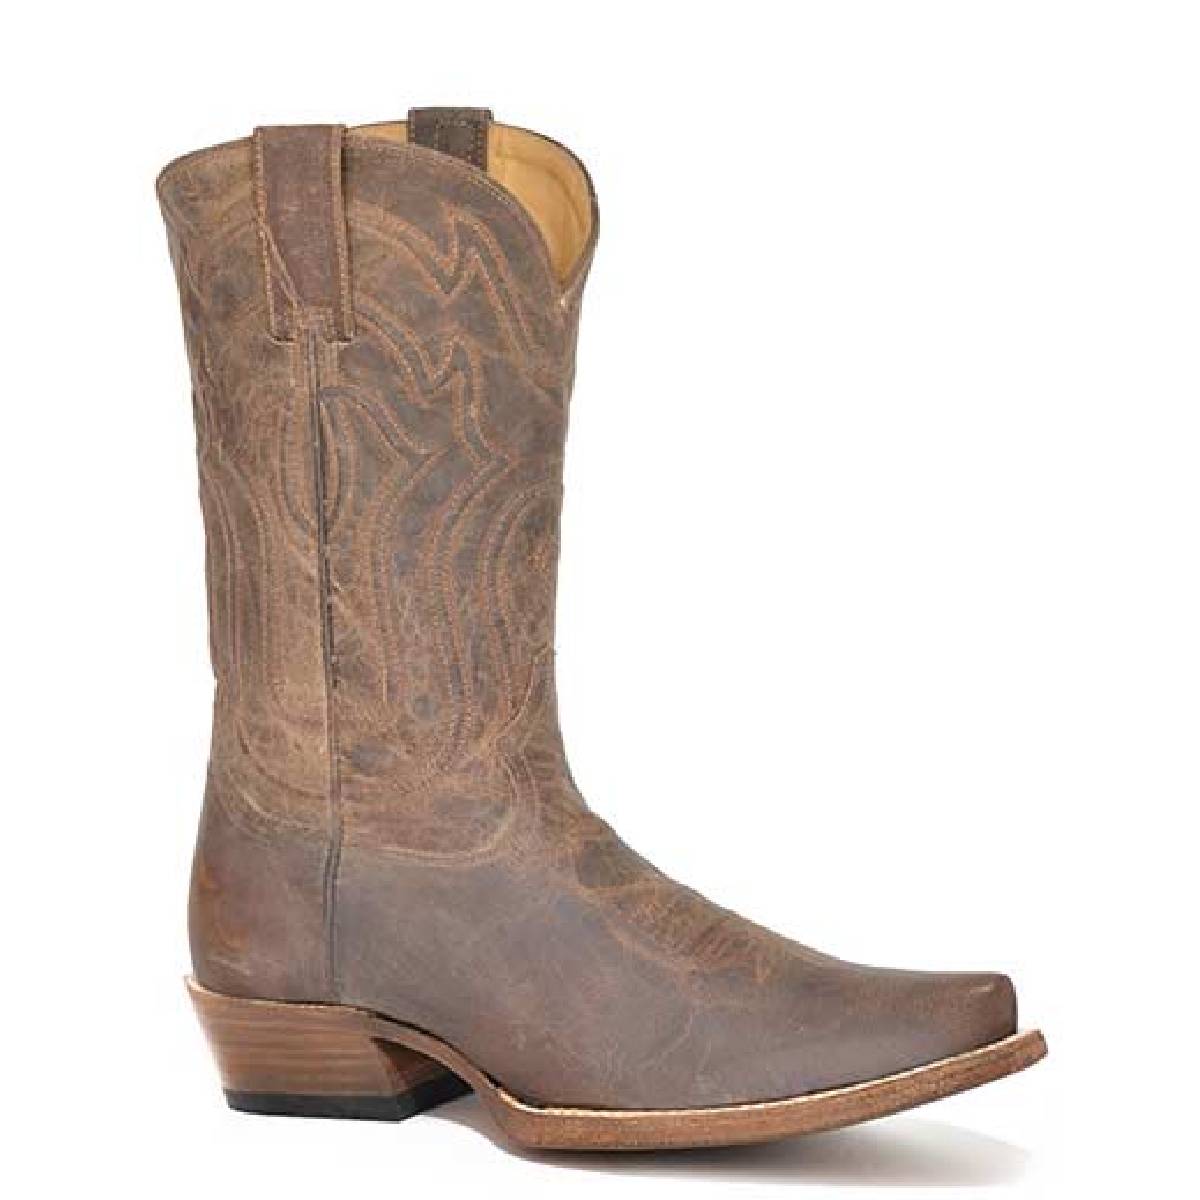 Men's Stetson Roughstock Leather Boots Handcrafted Oiled Tan - yeehawcowboy